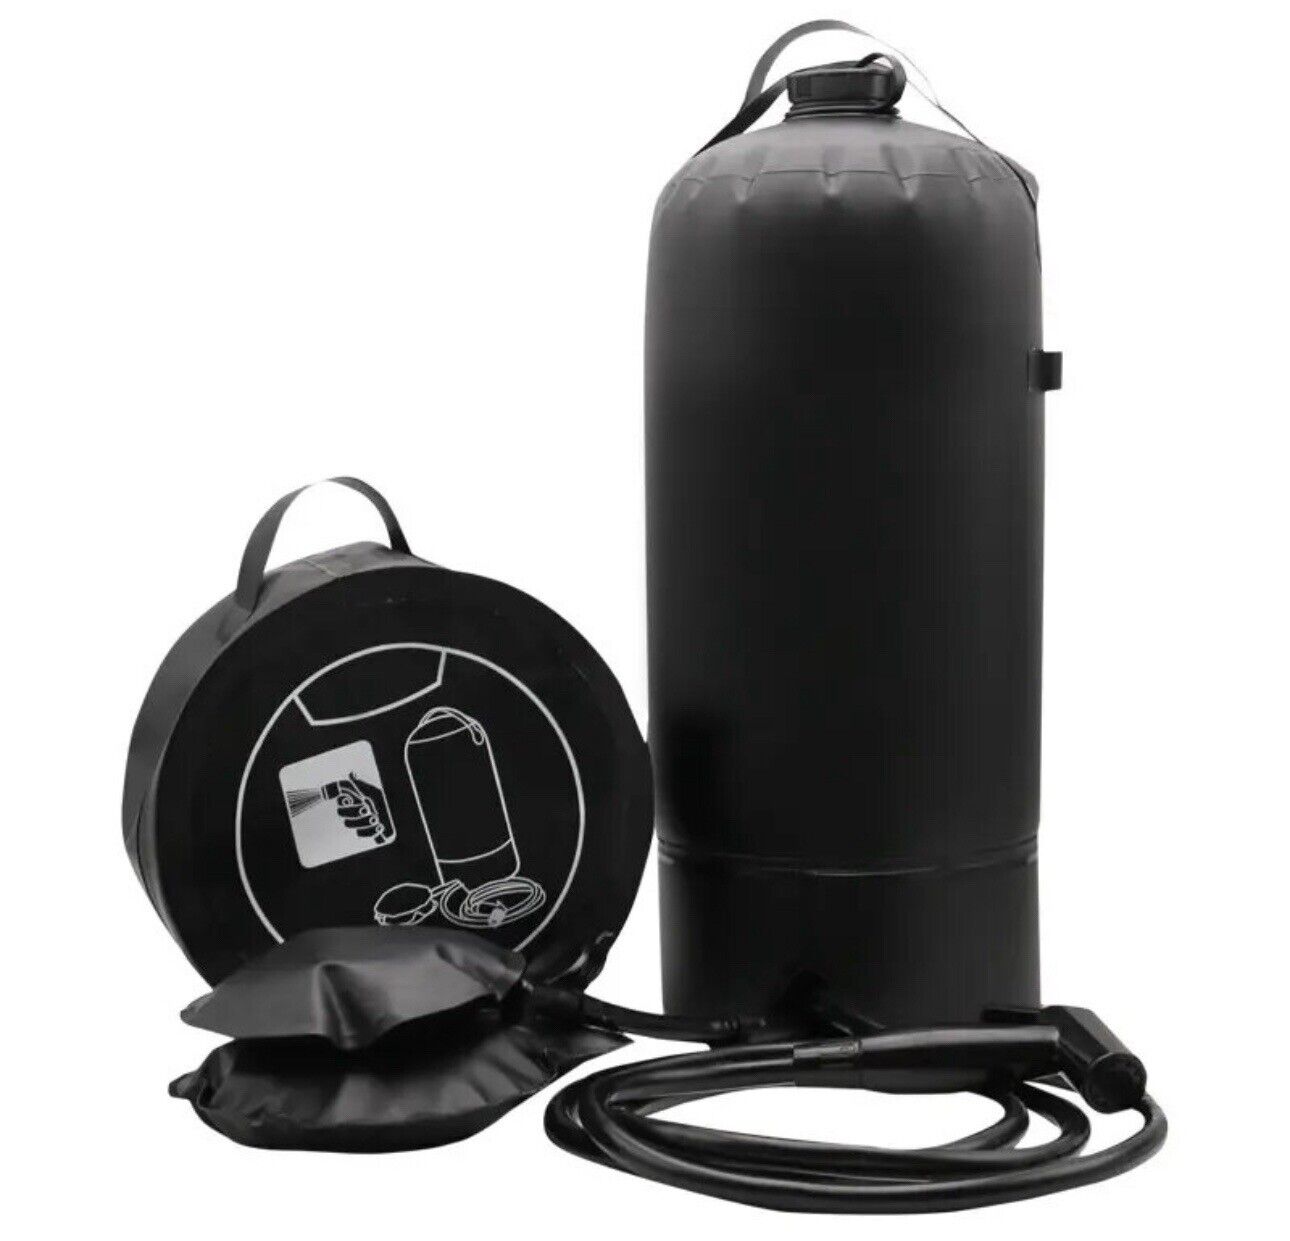 12L Outdoor Heated By Sun , Shower Water Bag W/ Foot Pump & Sprayer. Easy 2 Move